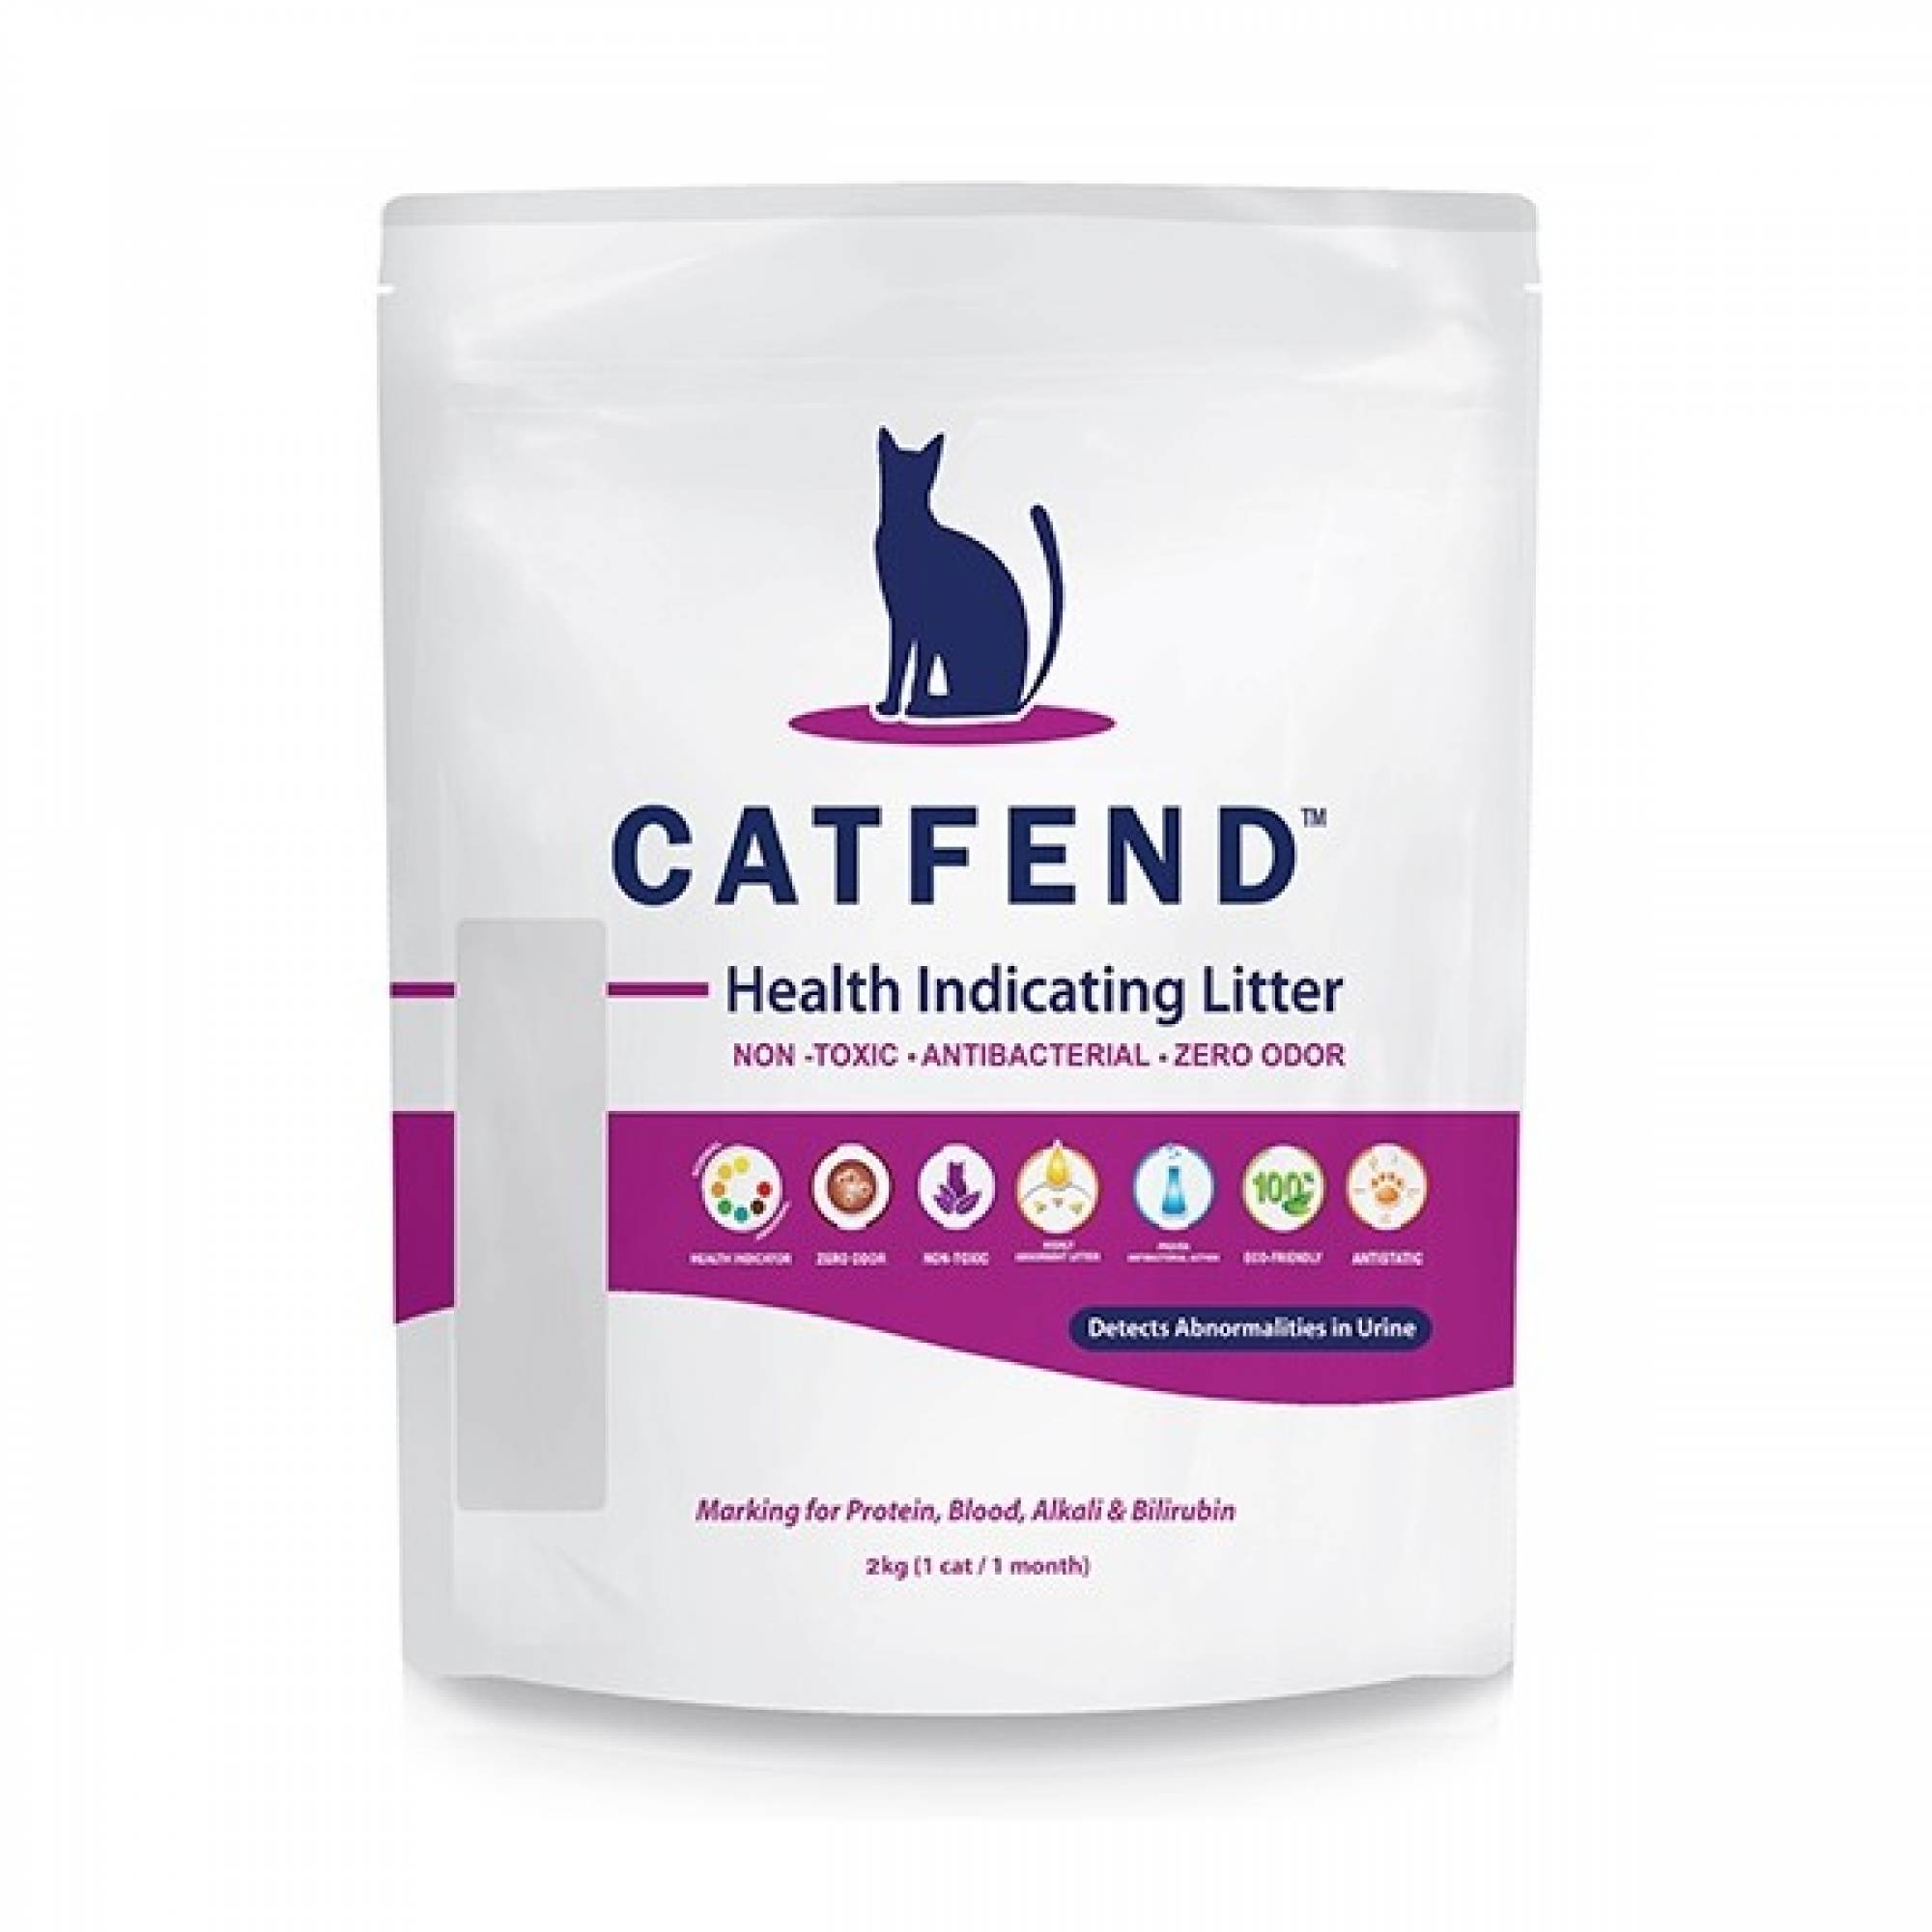 CATFEND - Health Indicating Litter